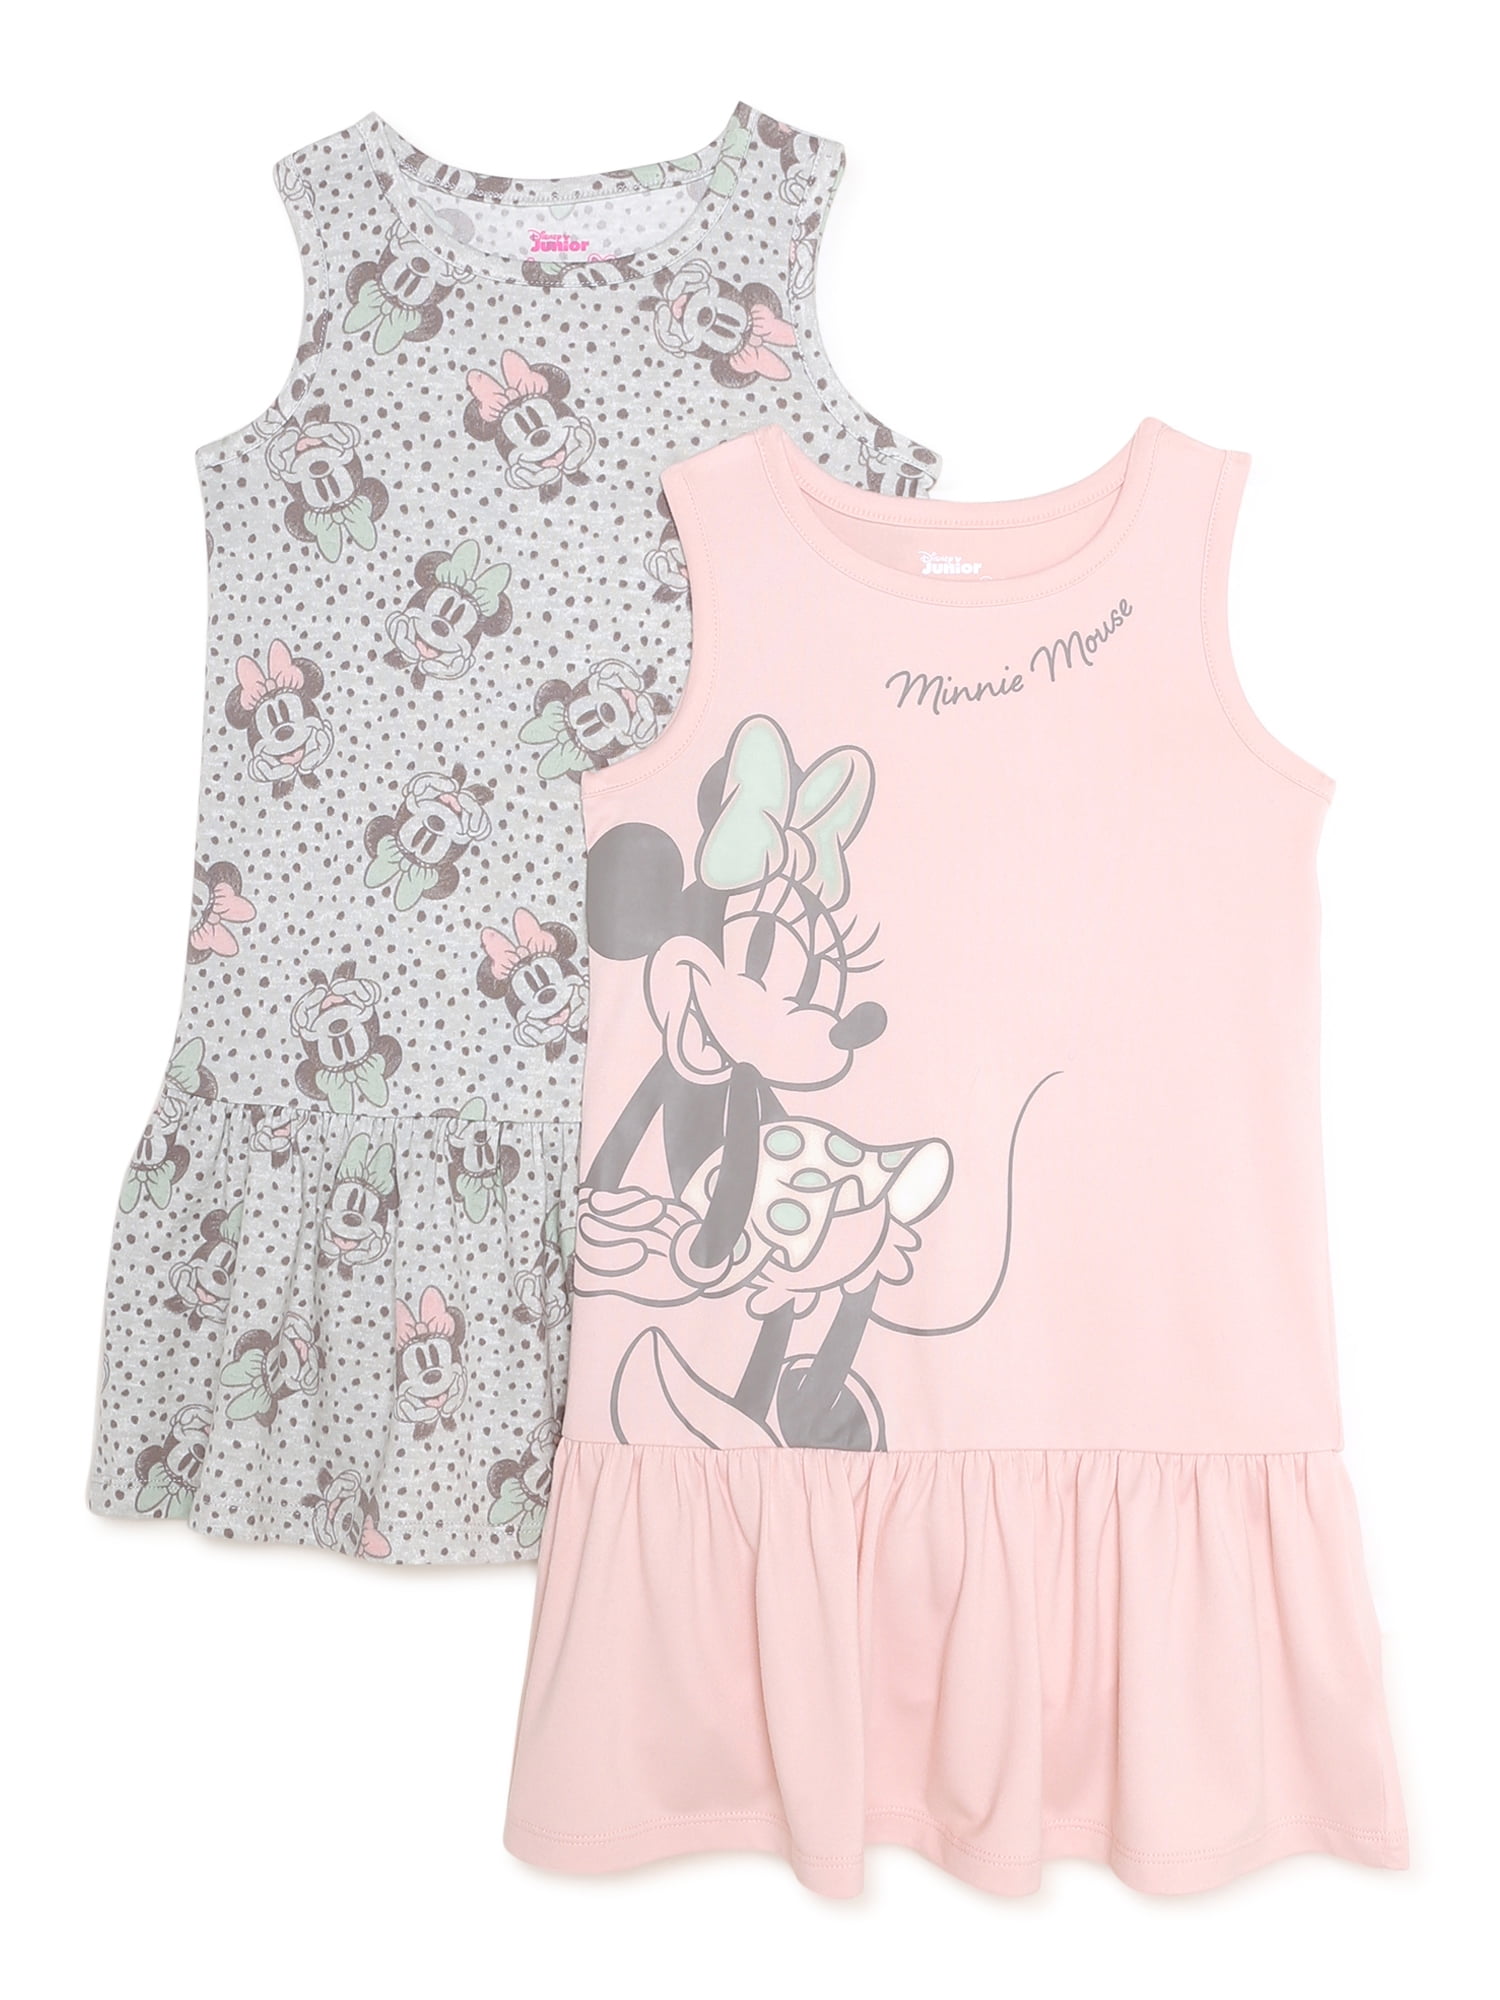 Disney's Minnie Mouse Baby Girl Print Tiered Dress 18 Mo Grey Pink NWT $24 